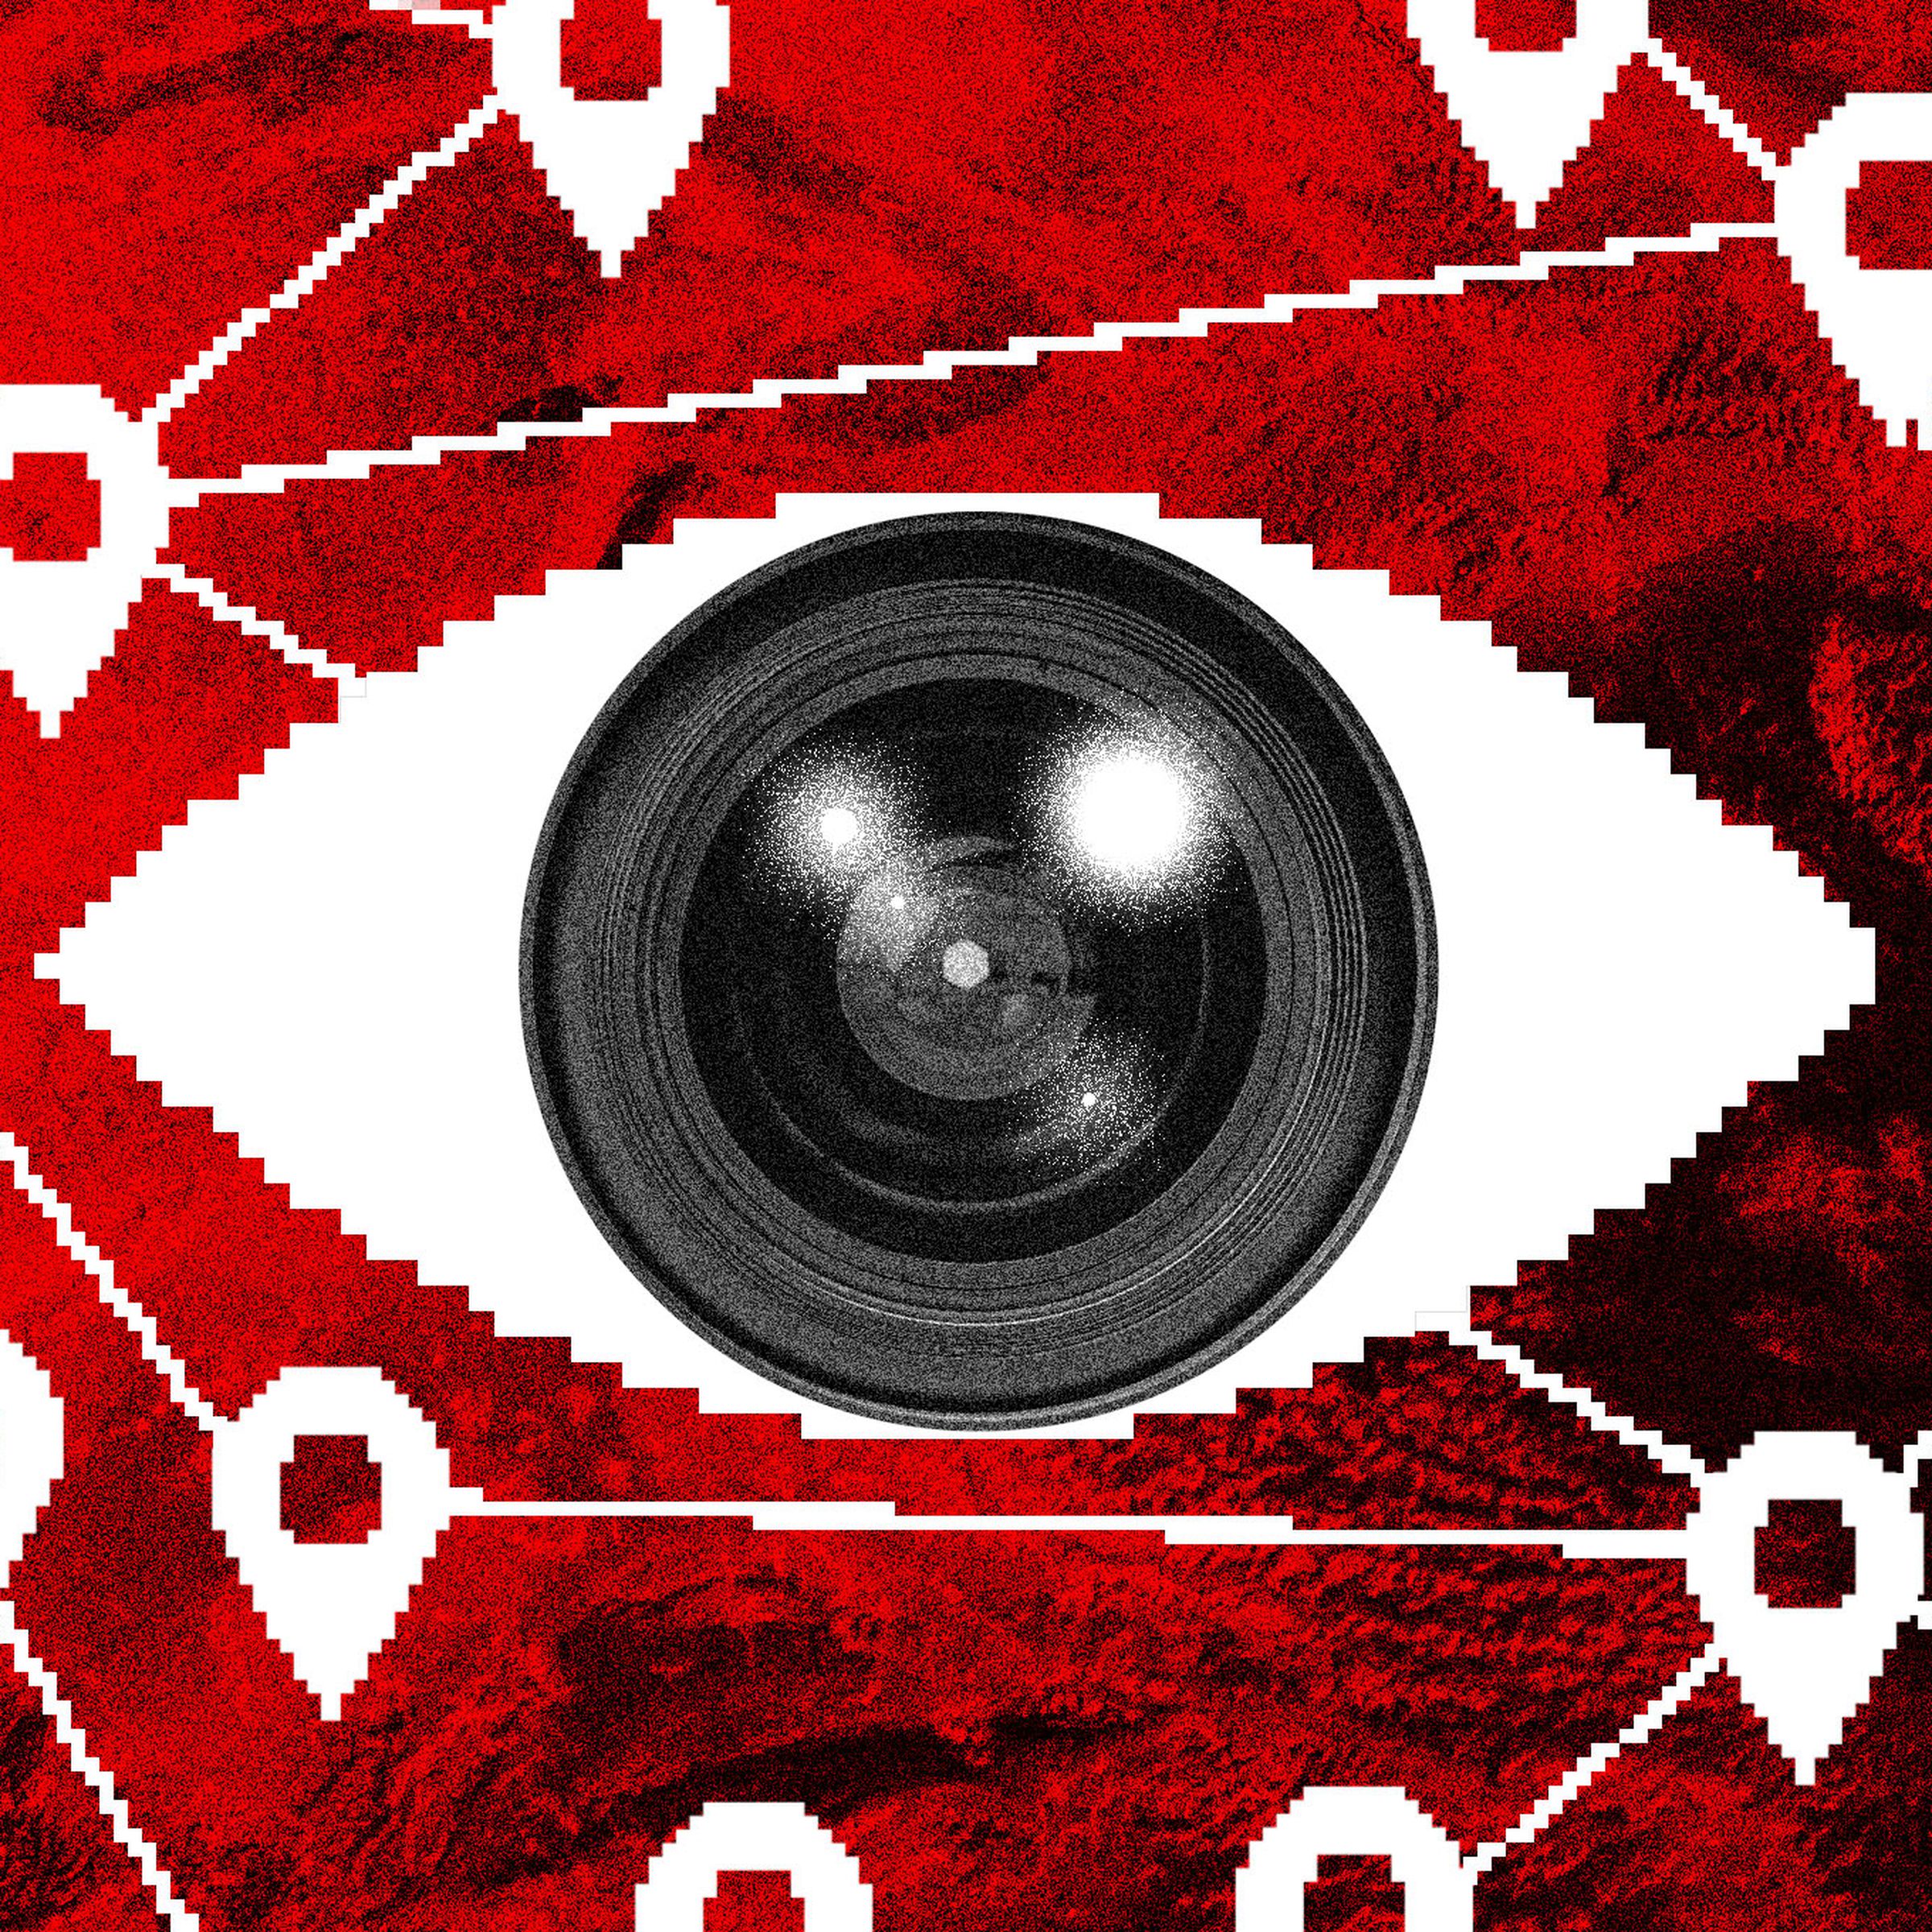 Photo collage of a big eye with a camera lens instead of a pupil in front of a background of location plackets over a topographical map.